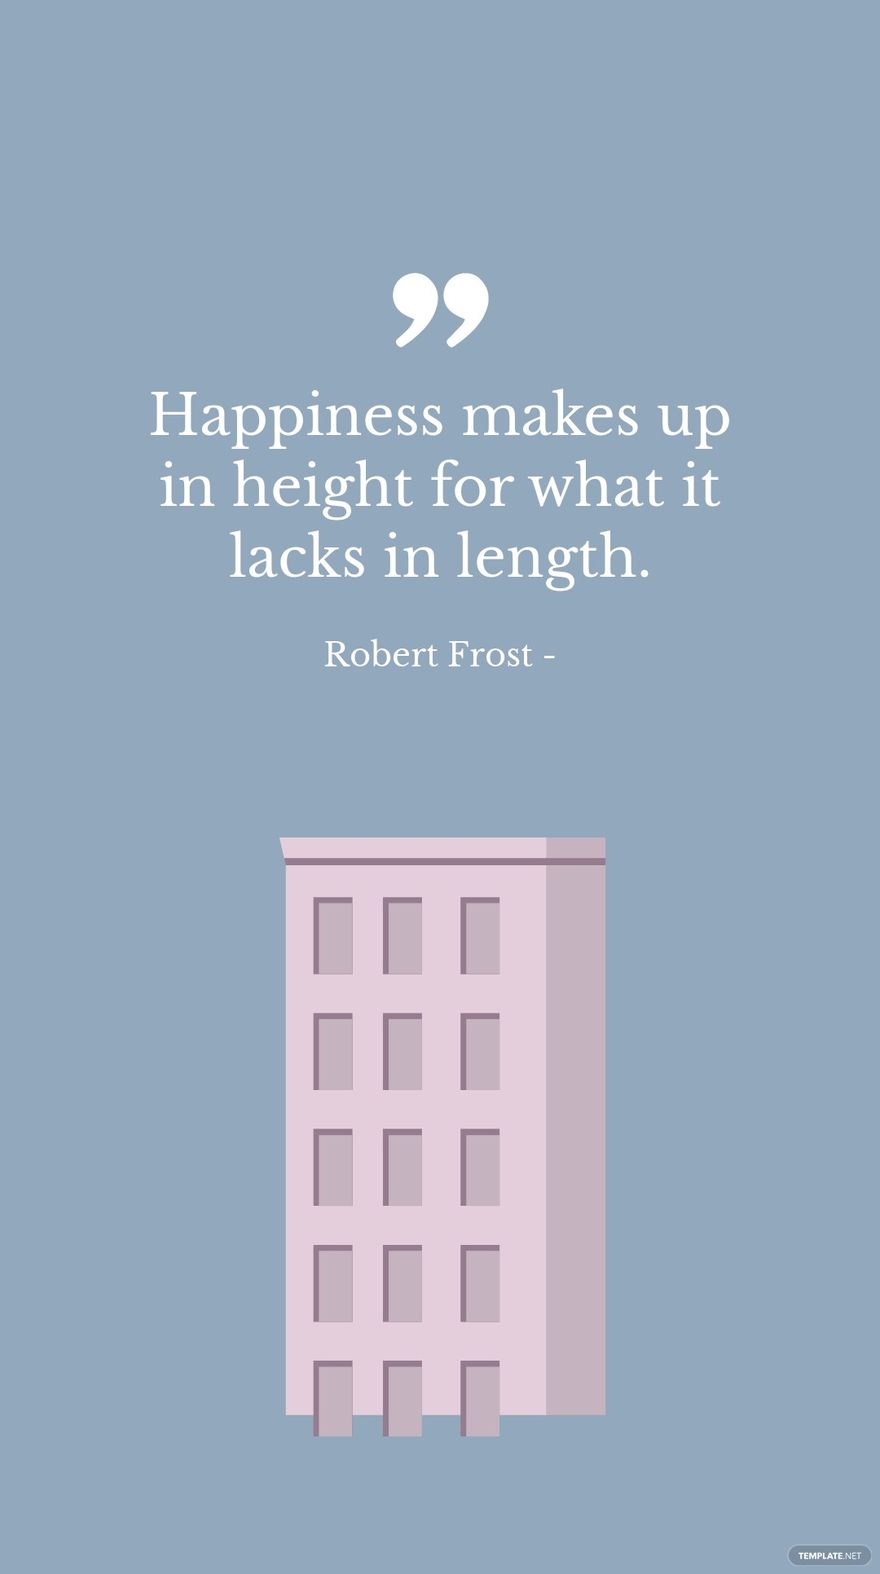 Free Robert Frost - Happiness makes up in height for what it lacks in length.